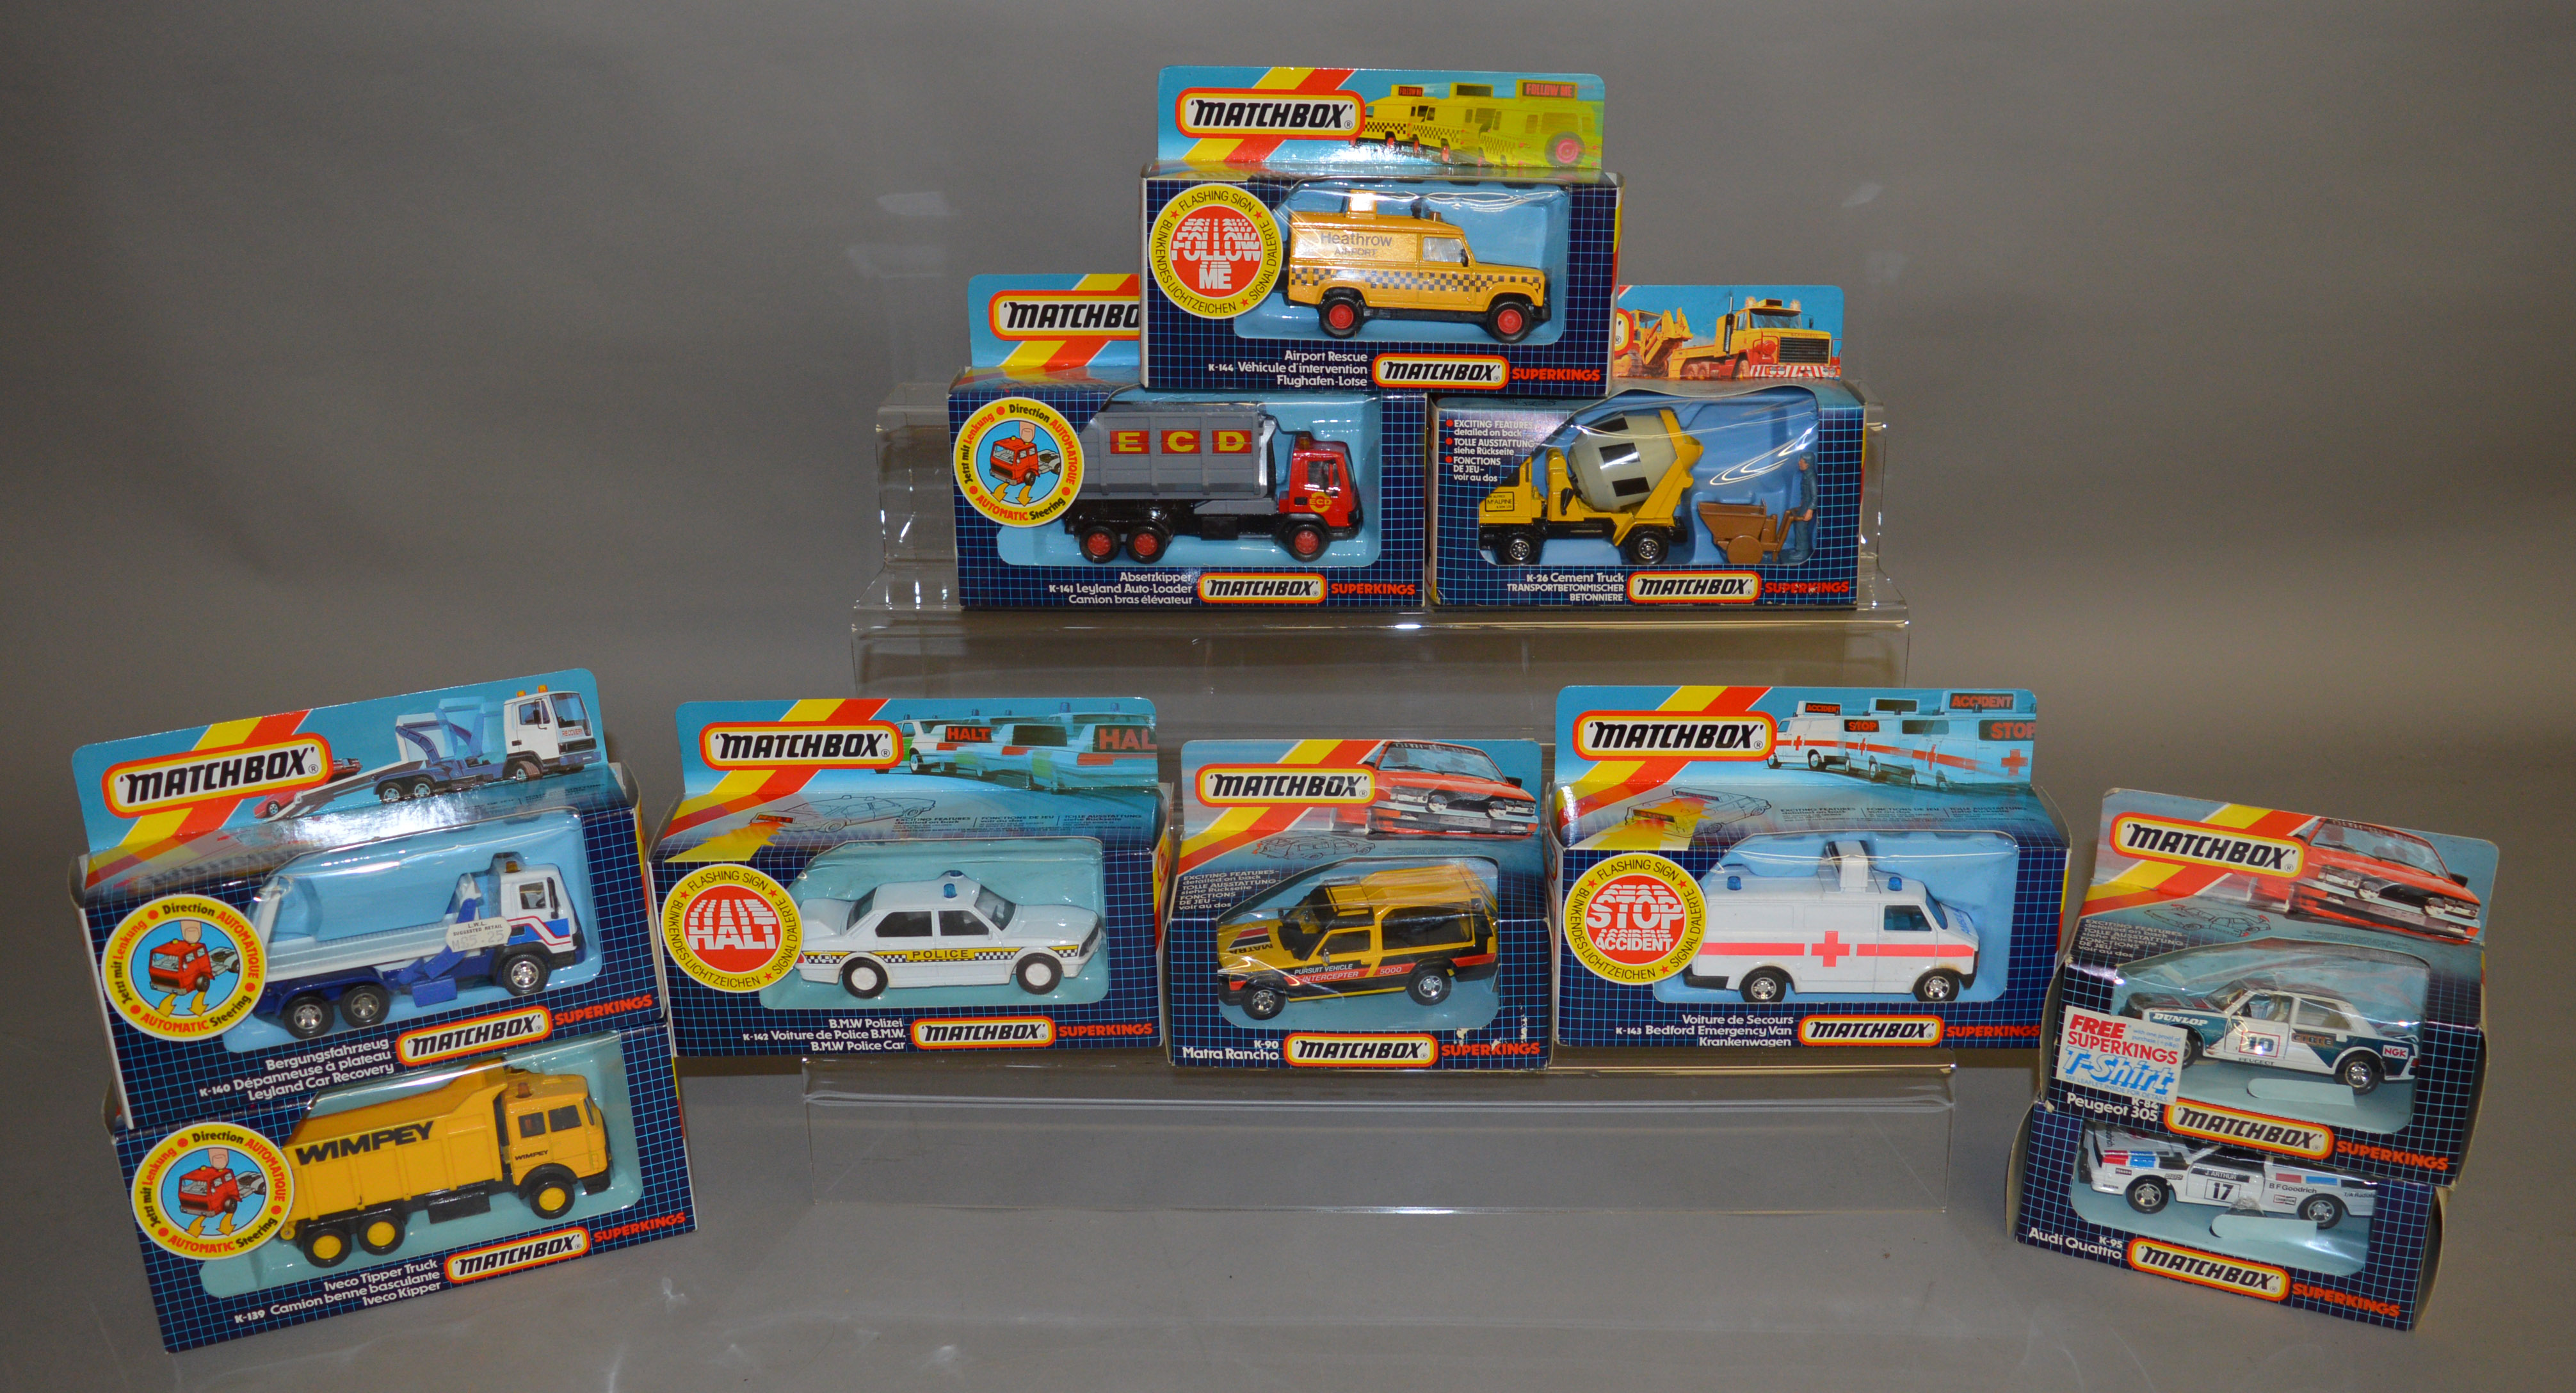 10 Matchbox models from the 'SuperKings' range, all in window box packaging, including K-140 Leyland